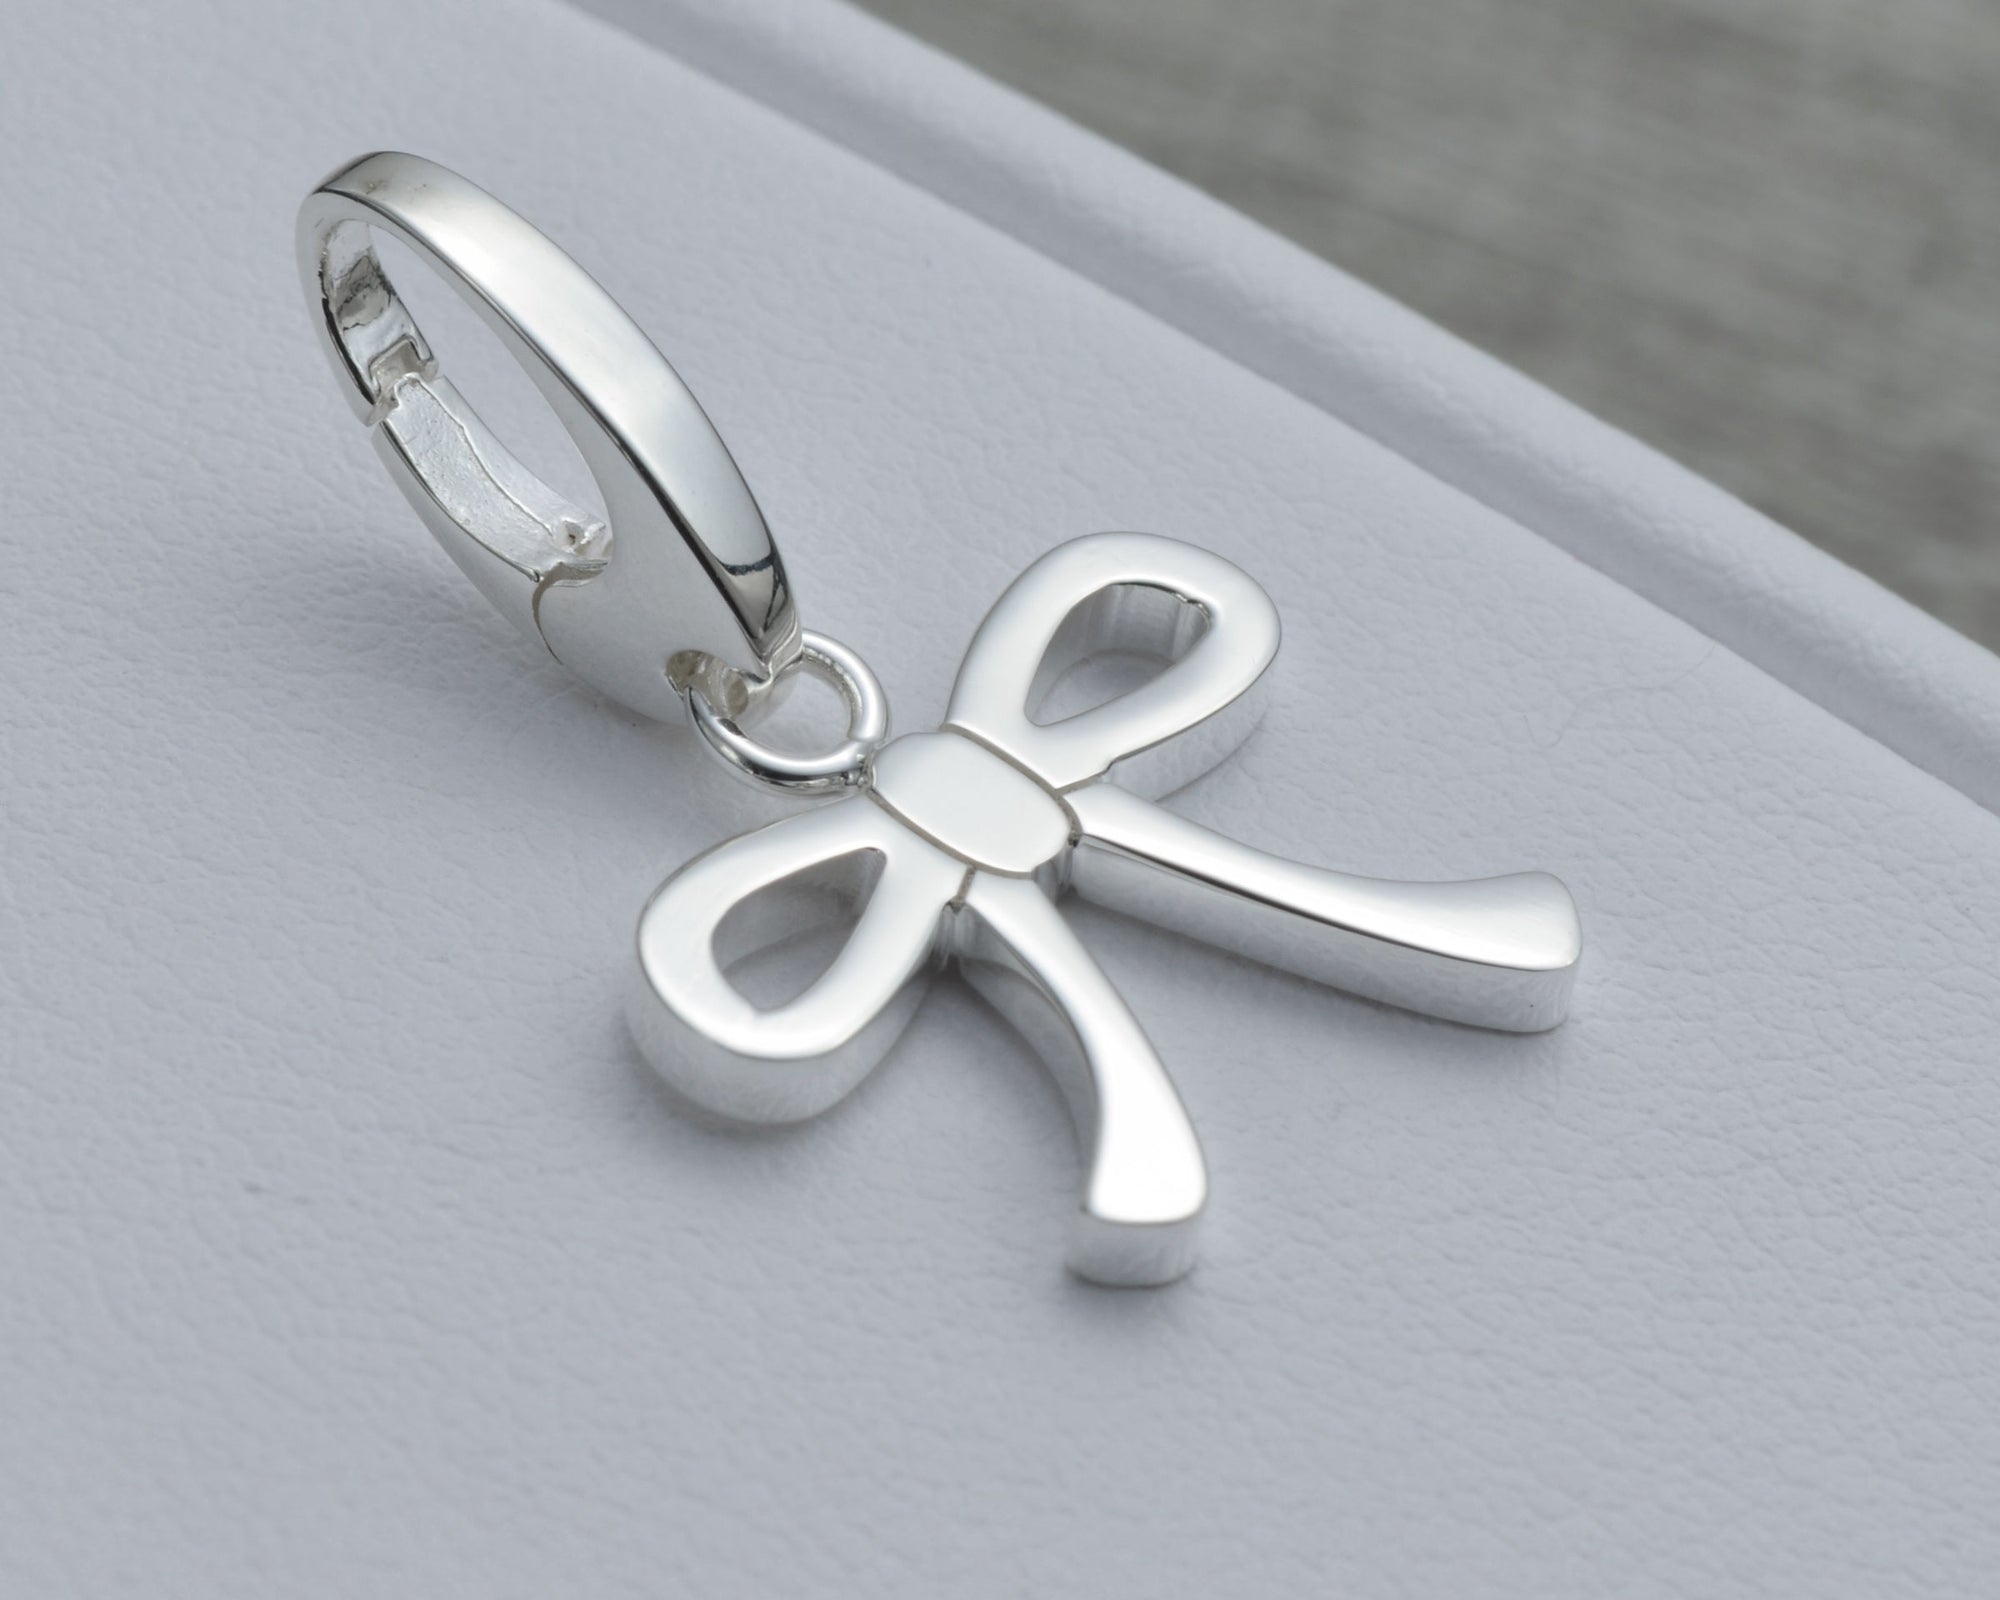 BOW CHARM IN STERLING SILVER